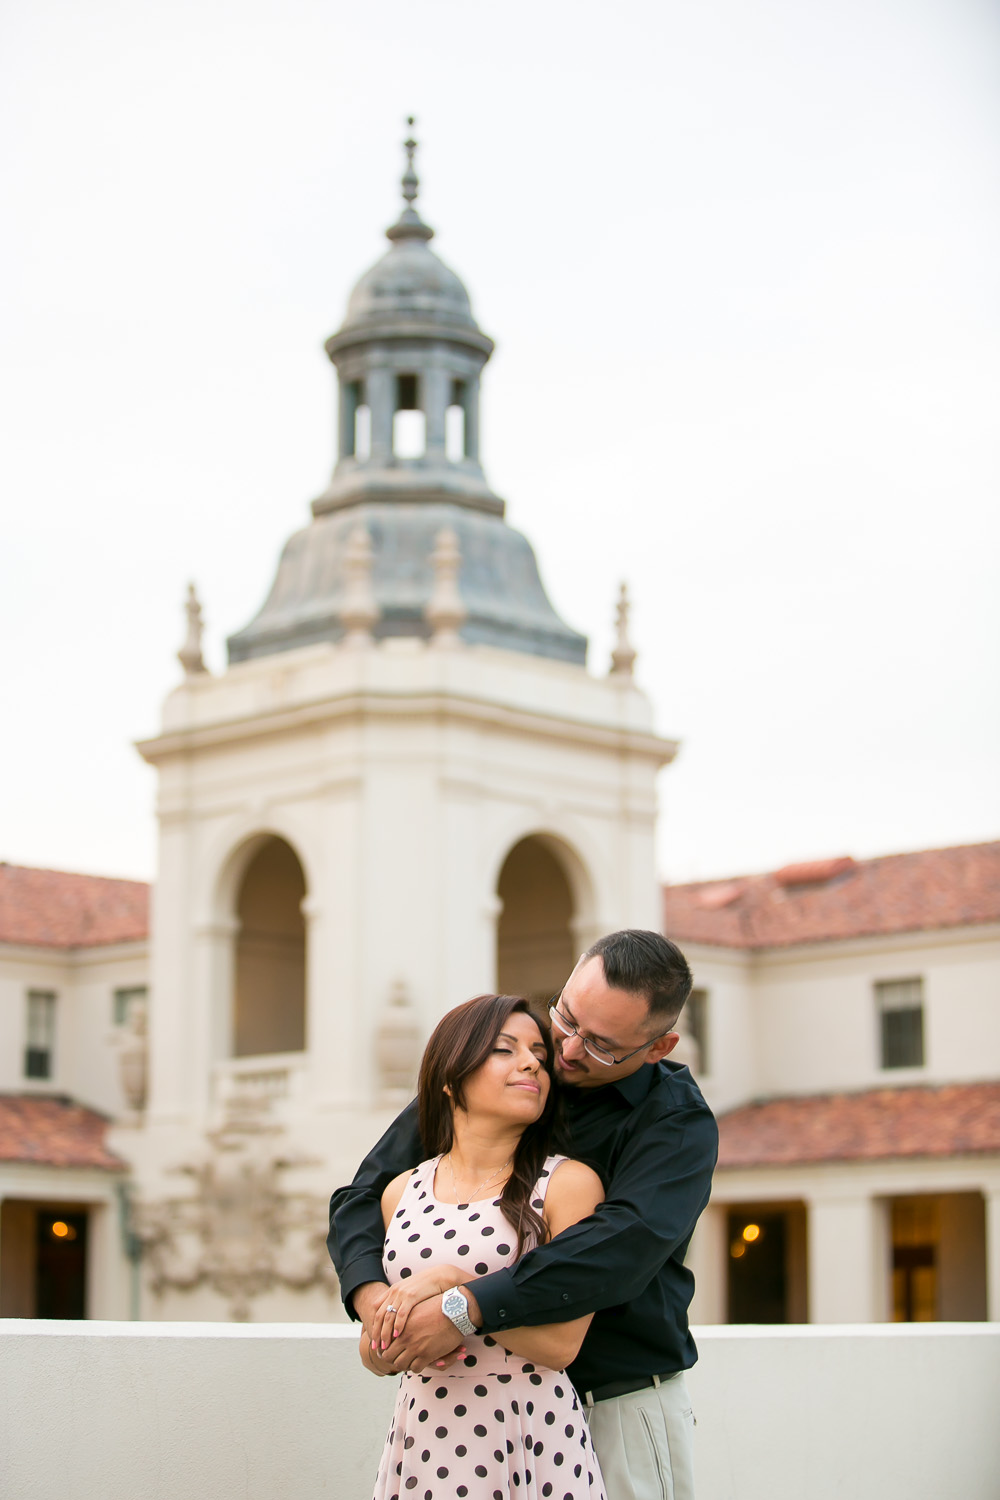 pasadena city hall, engagement session, love, engaged, fiance, water fountain, park bench, chris holt photography, los angeles wedding photography